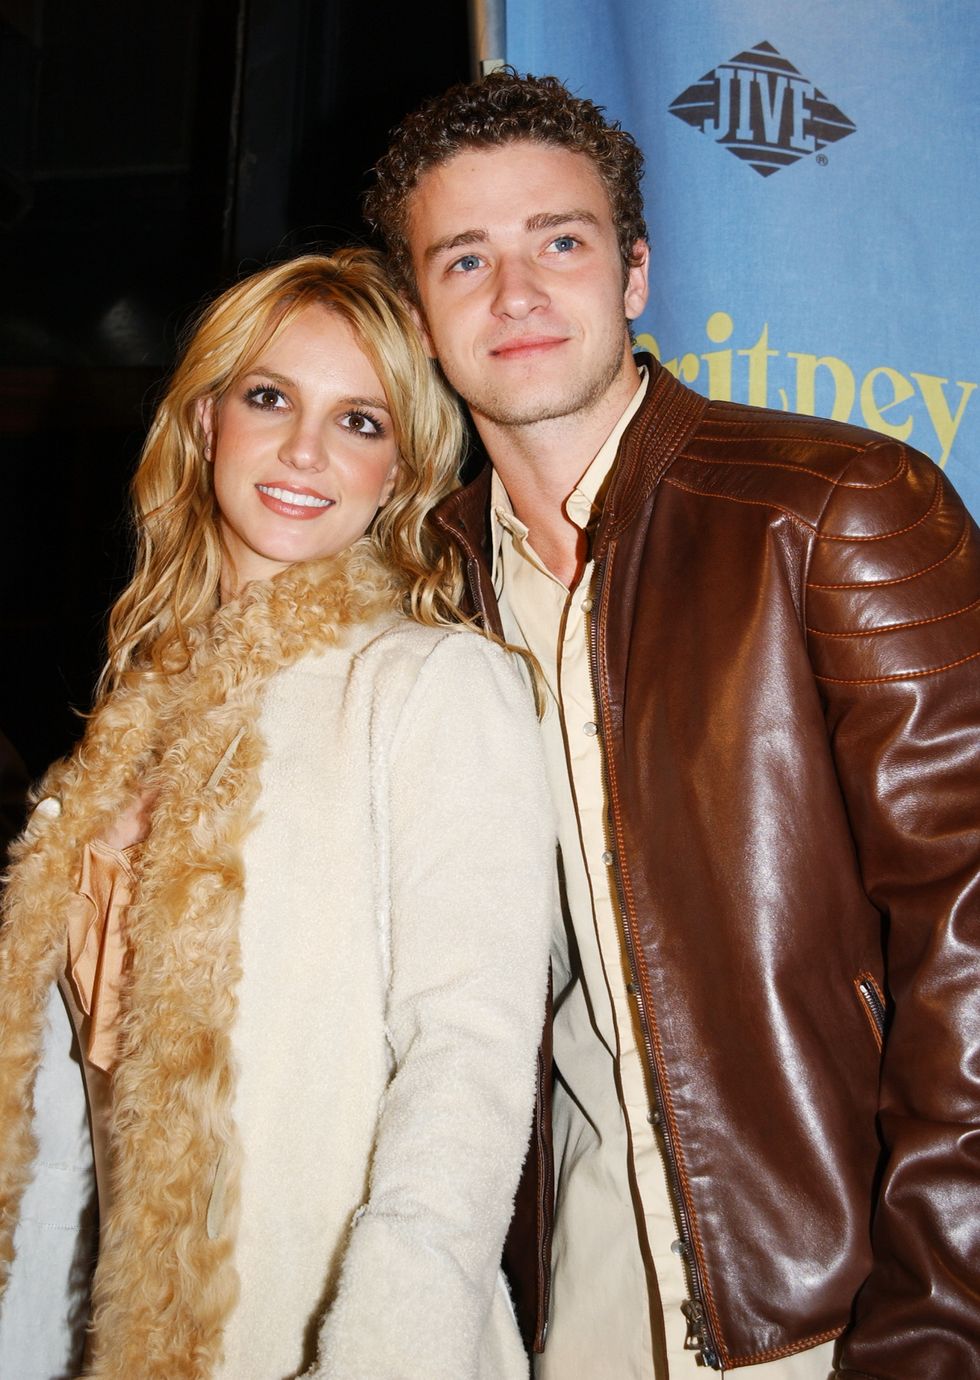 united states november 06 britney spears and boyfriend, n syncs justin timberlake, arrive at centro fly for a party marking the release of her new album, britney photo by richard corkeryny daily news archive via getty images